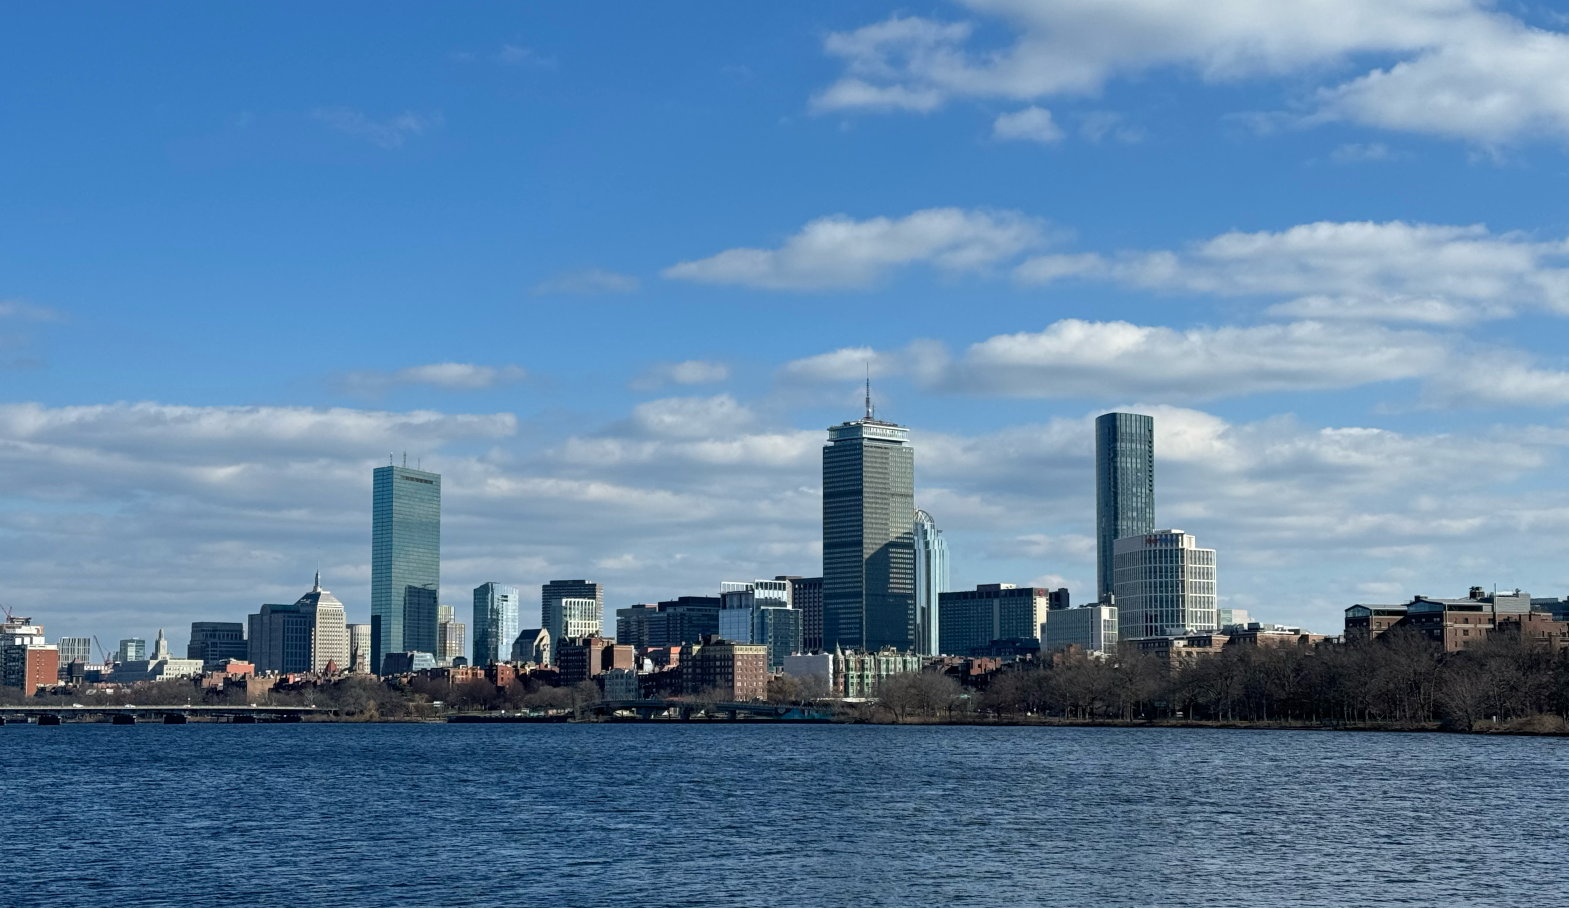 Boston – Home for the past 3 years